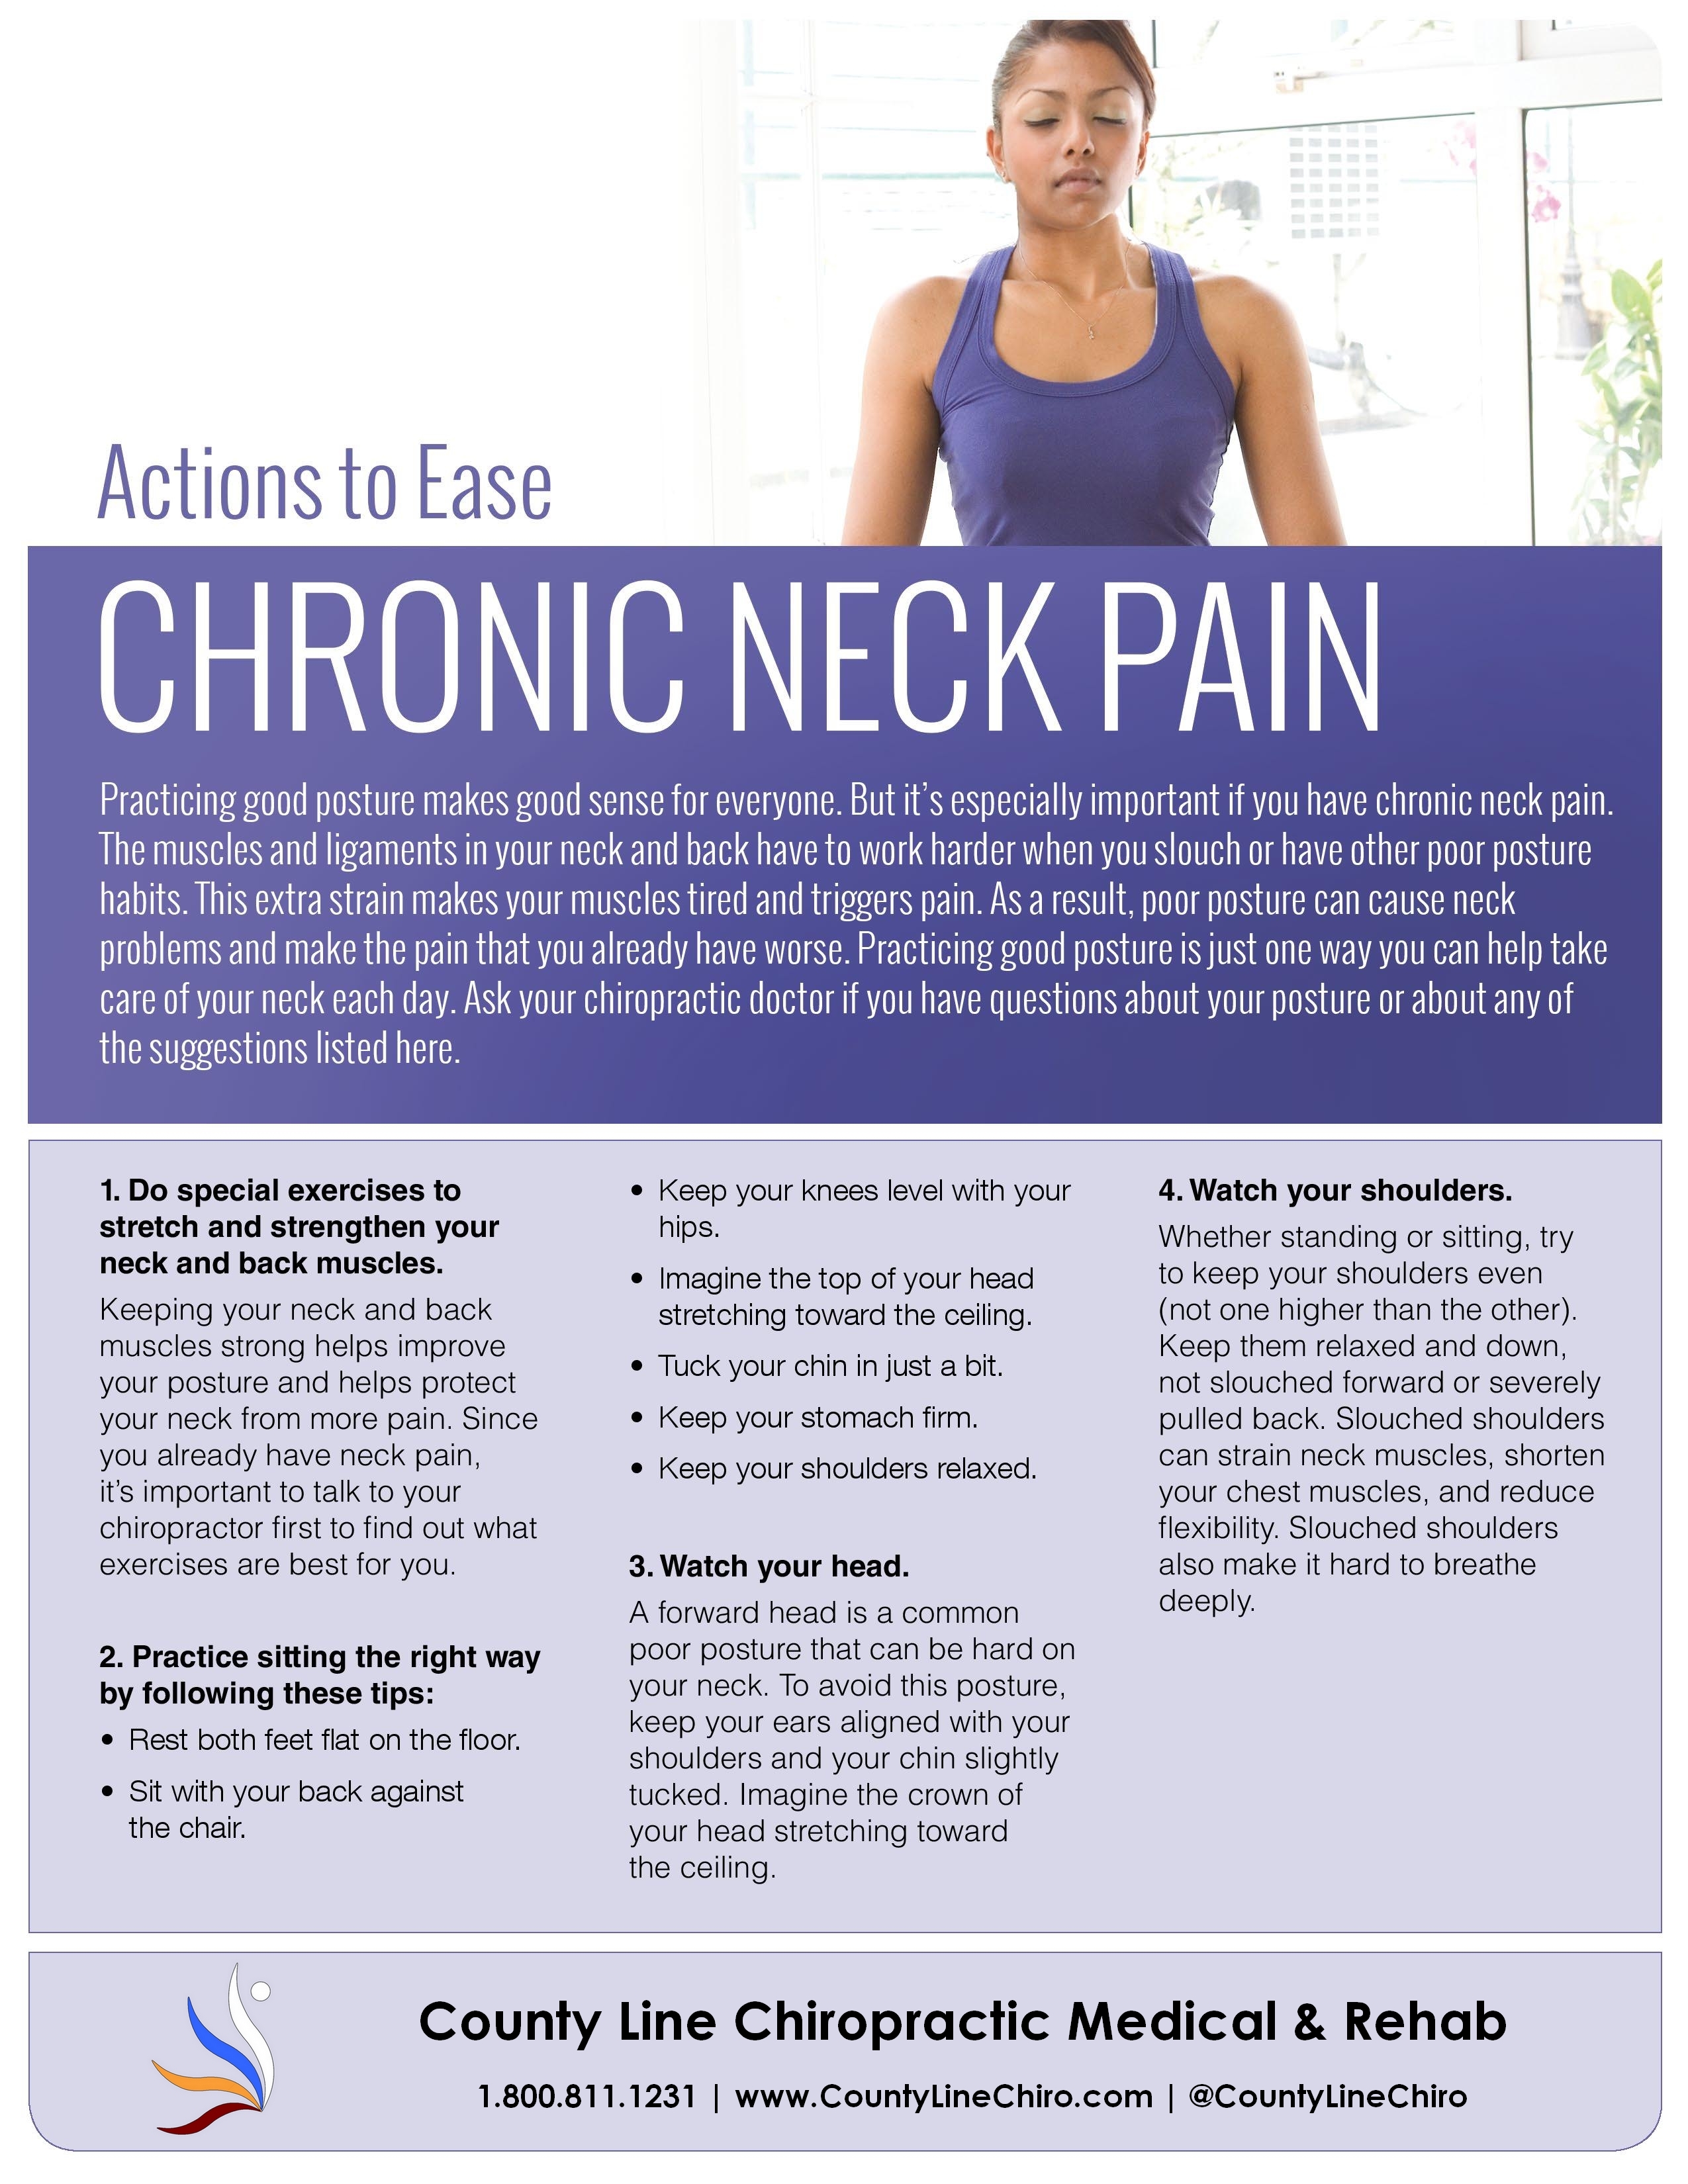 Actions to Ease Chronic Neck Pain